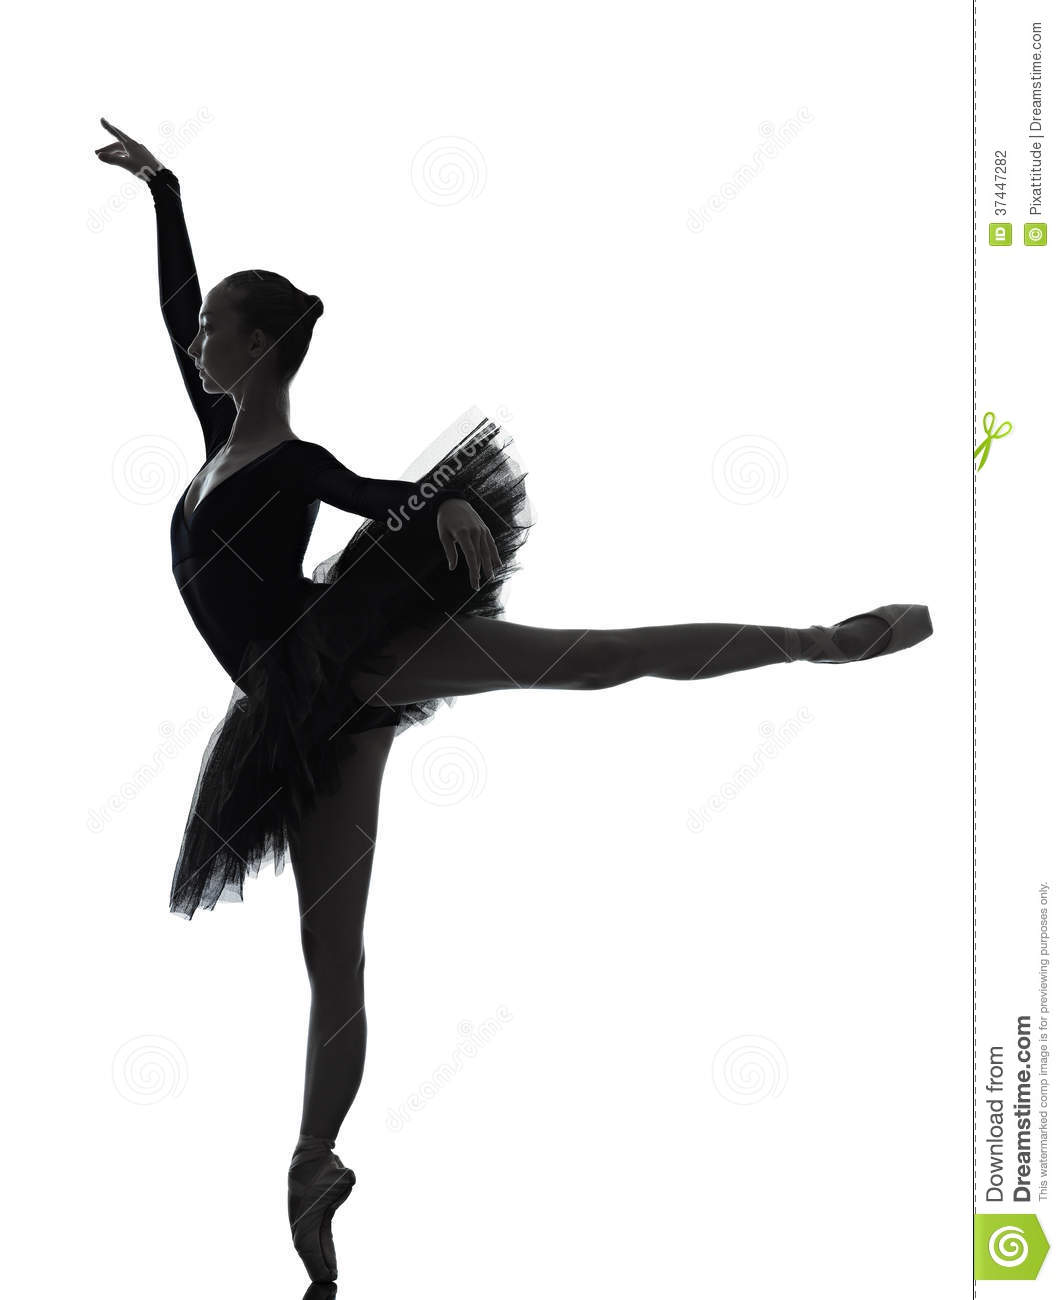     Ballet Dancer Dancing Silhouette Stock Photography   Image  37447282